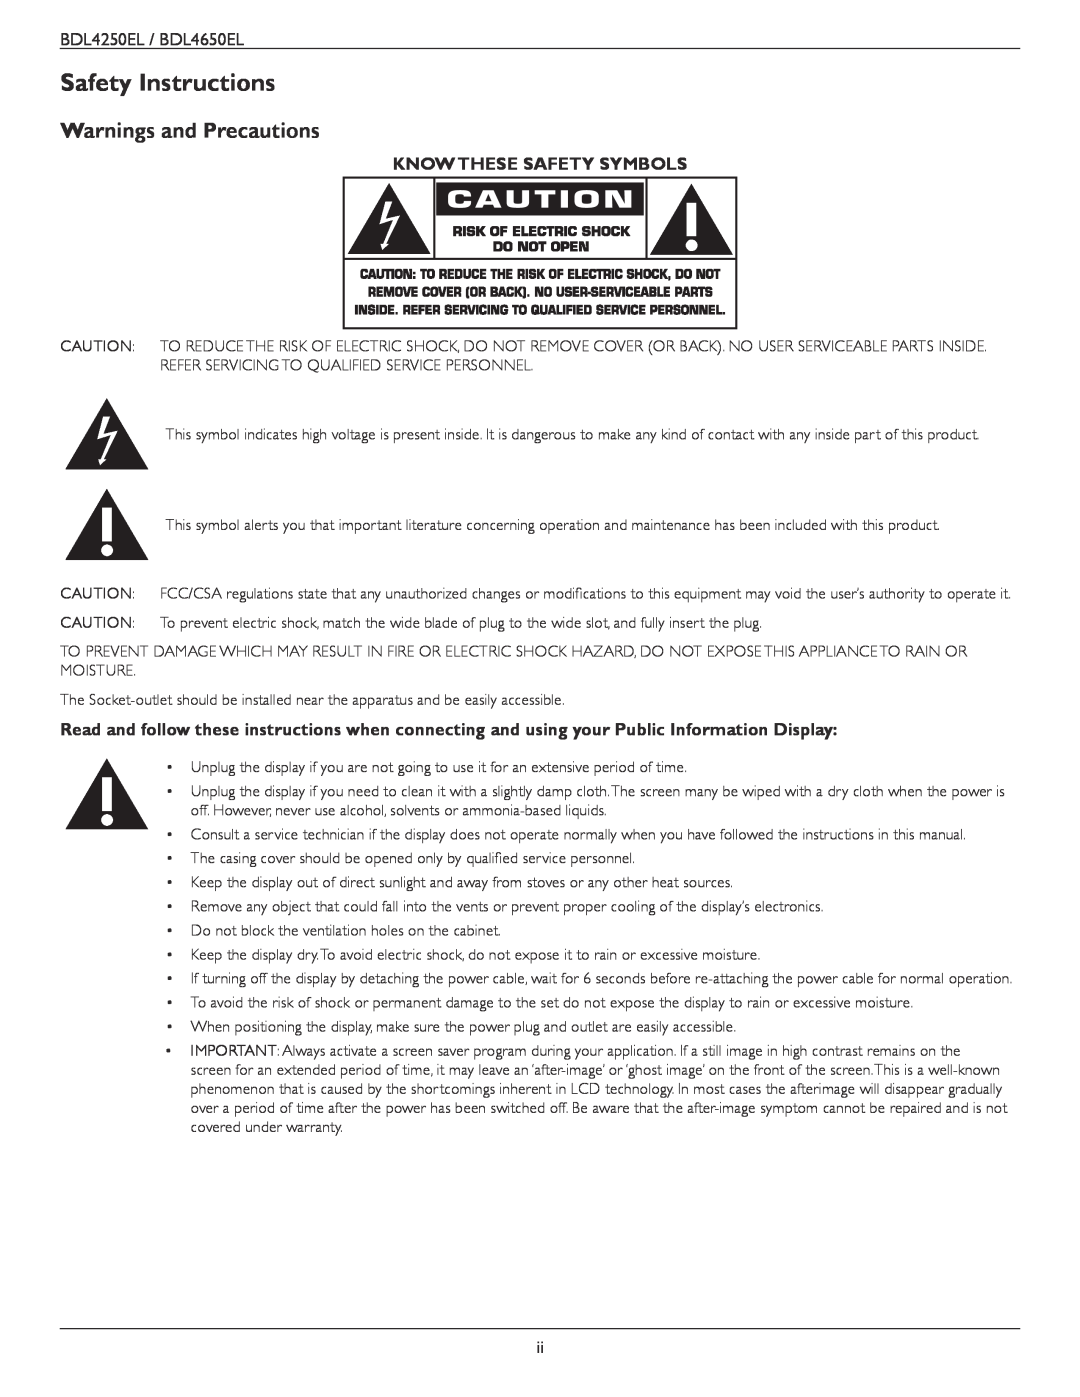 Philips BDL4650E, BDL4250EL user manual Safety Instructions, Warnings and Precautions, Know These Safety Symbols 